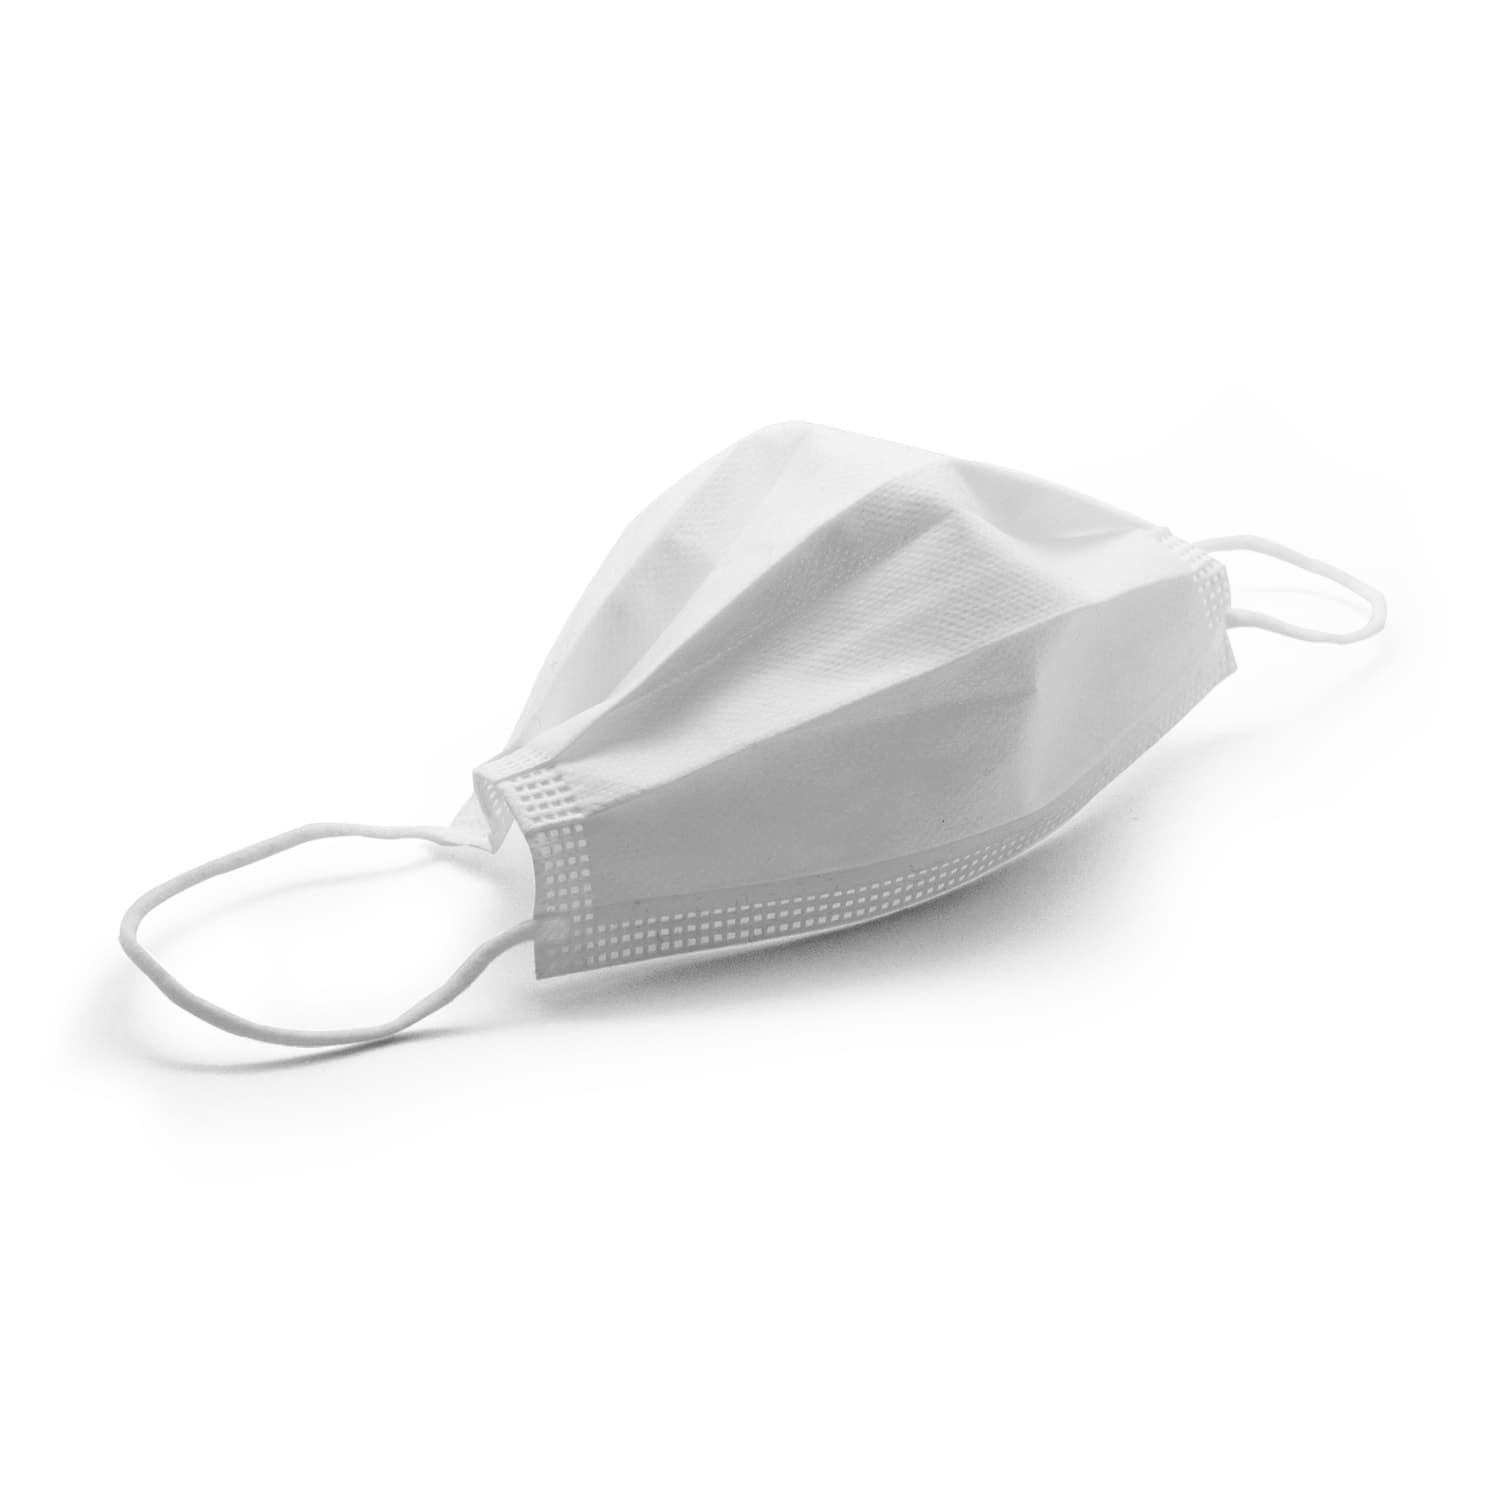 Type IIR disposable medical face mask